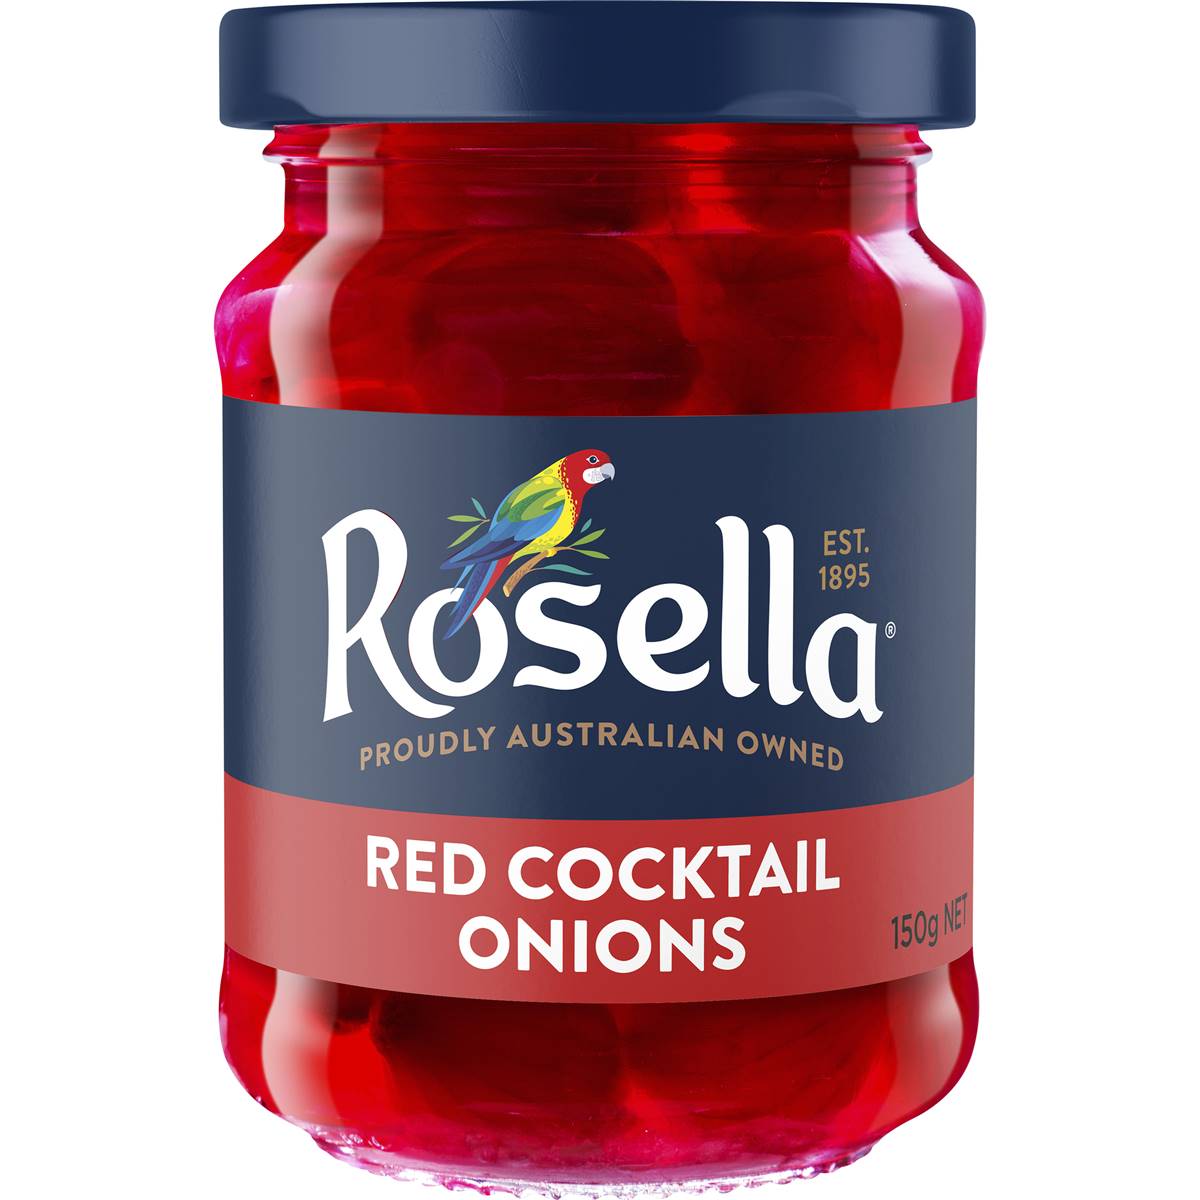 Calories in Rosella Red Cocktail Onions